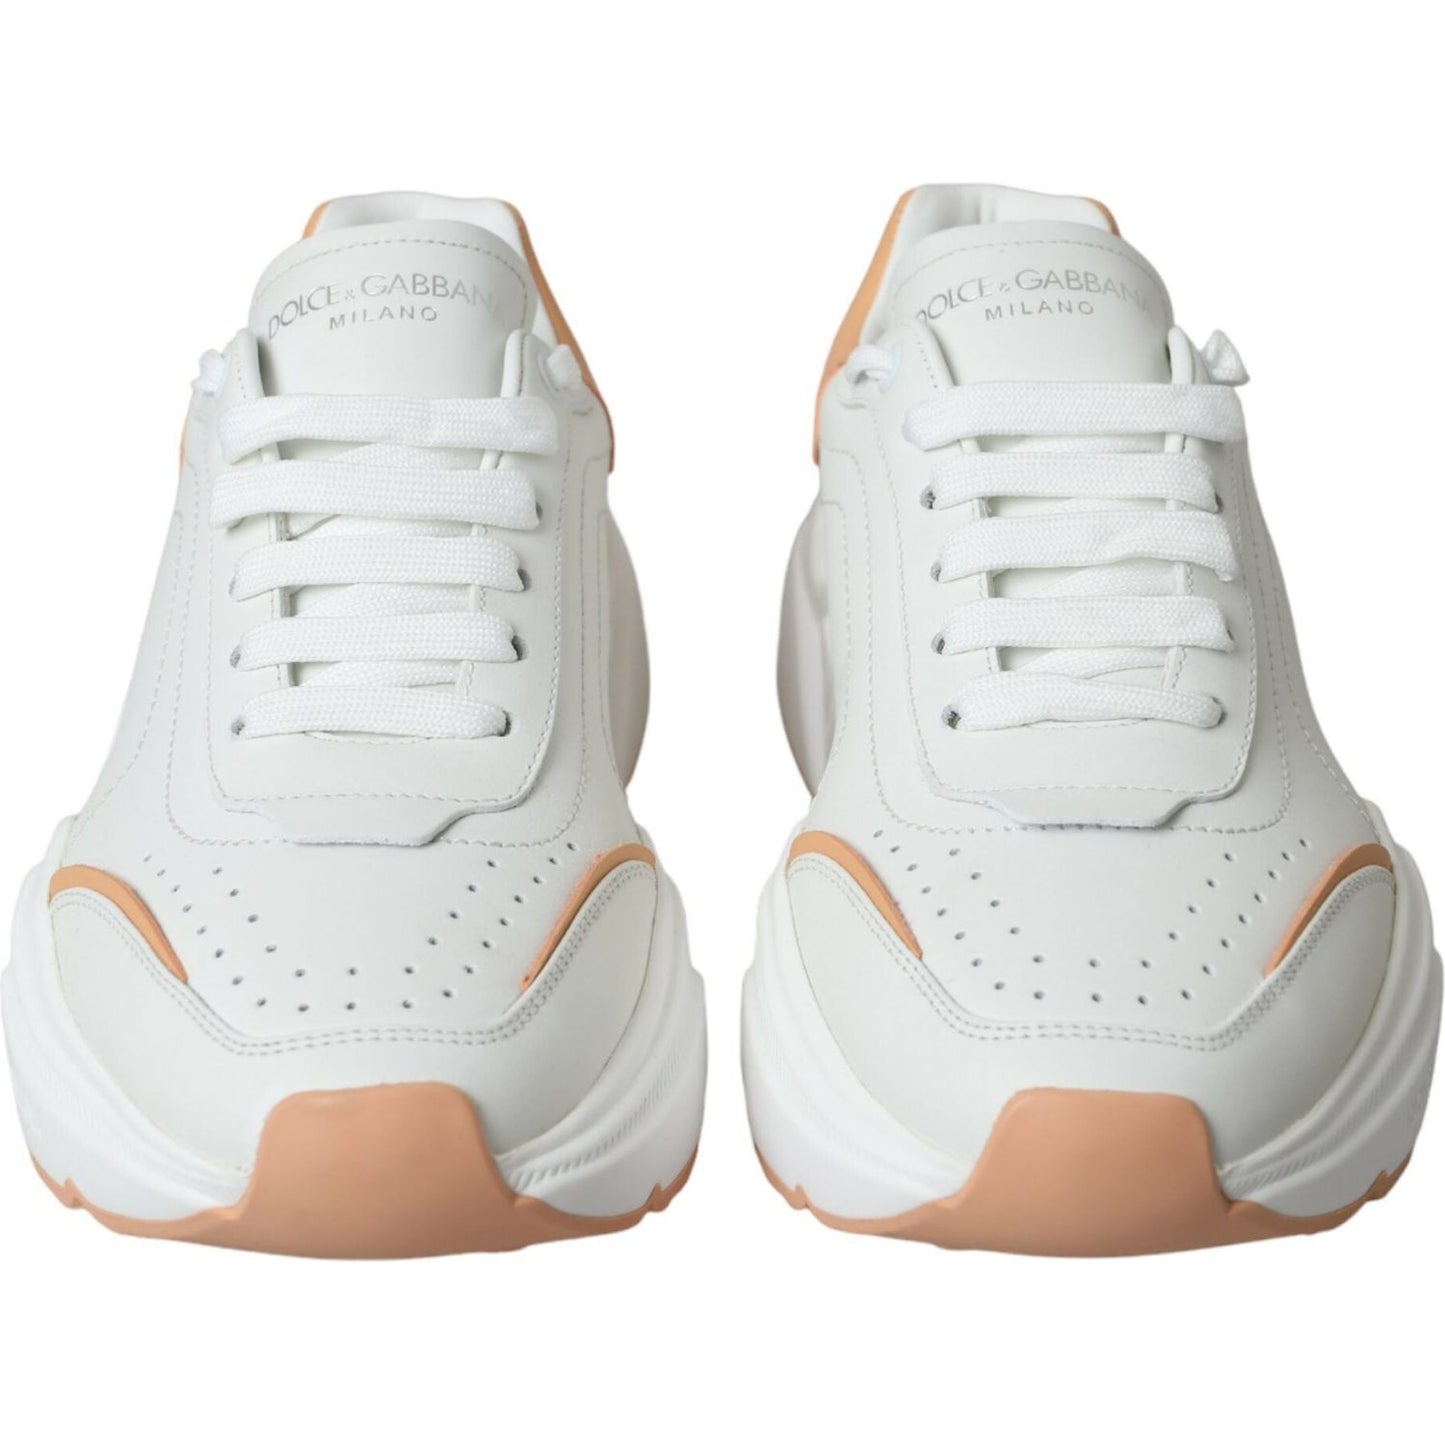 Dolce & Gabbana White Peach DAYMASTER Leather Sneakers Shoes white-peach-daymaster-leather-sneakers-shoes